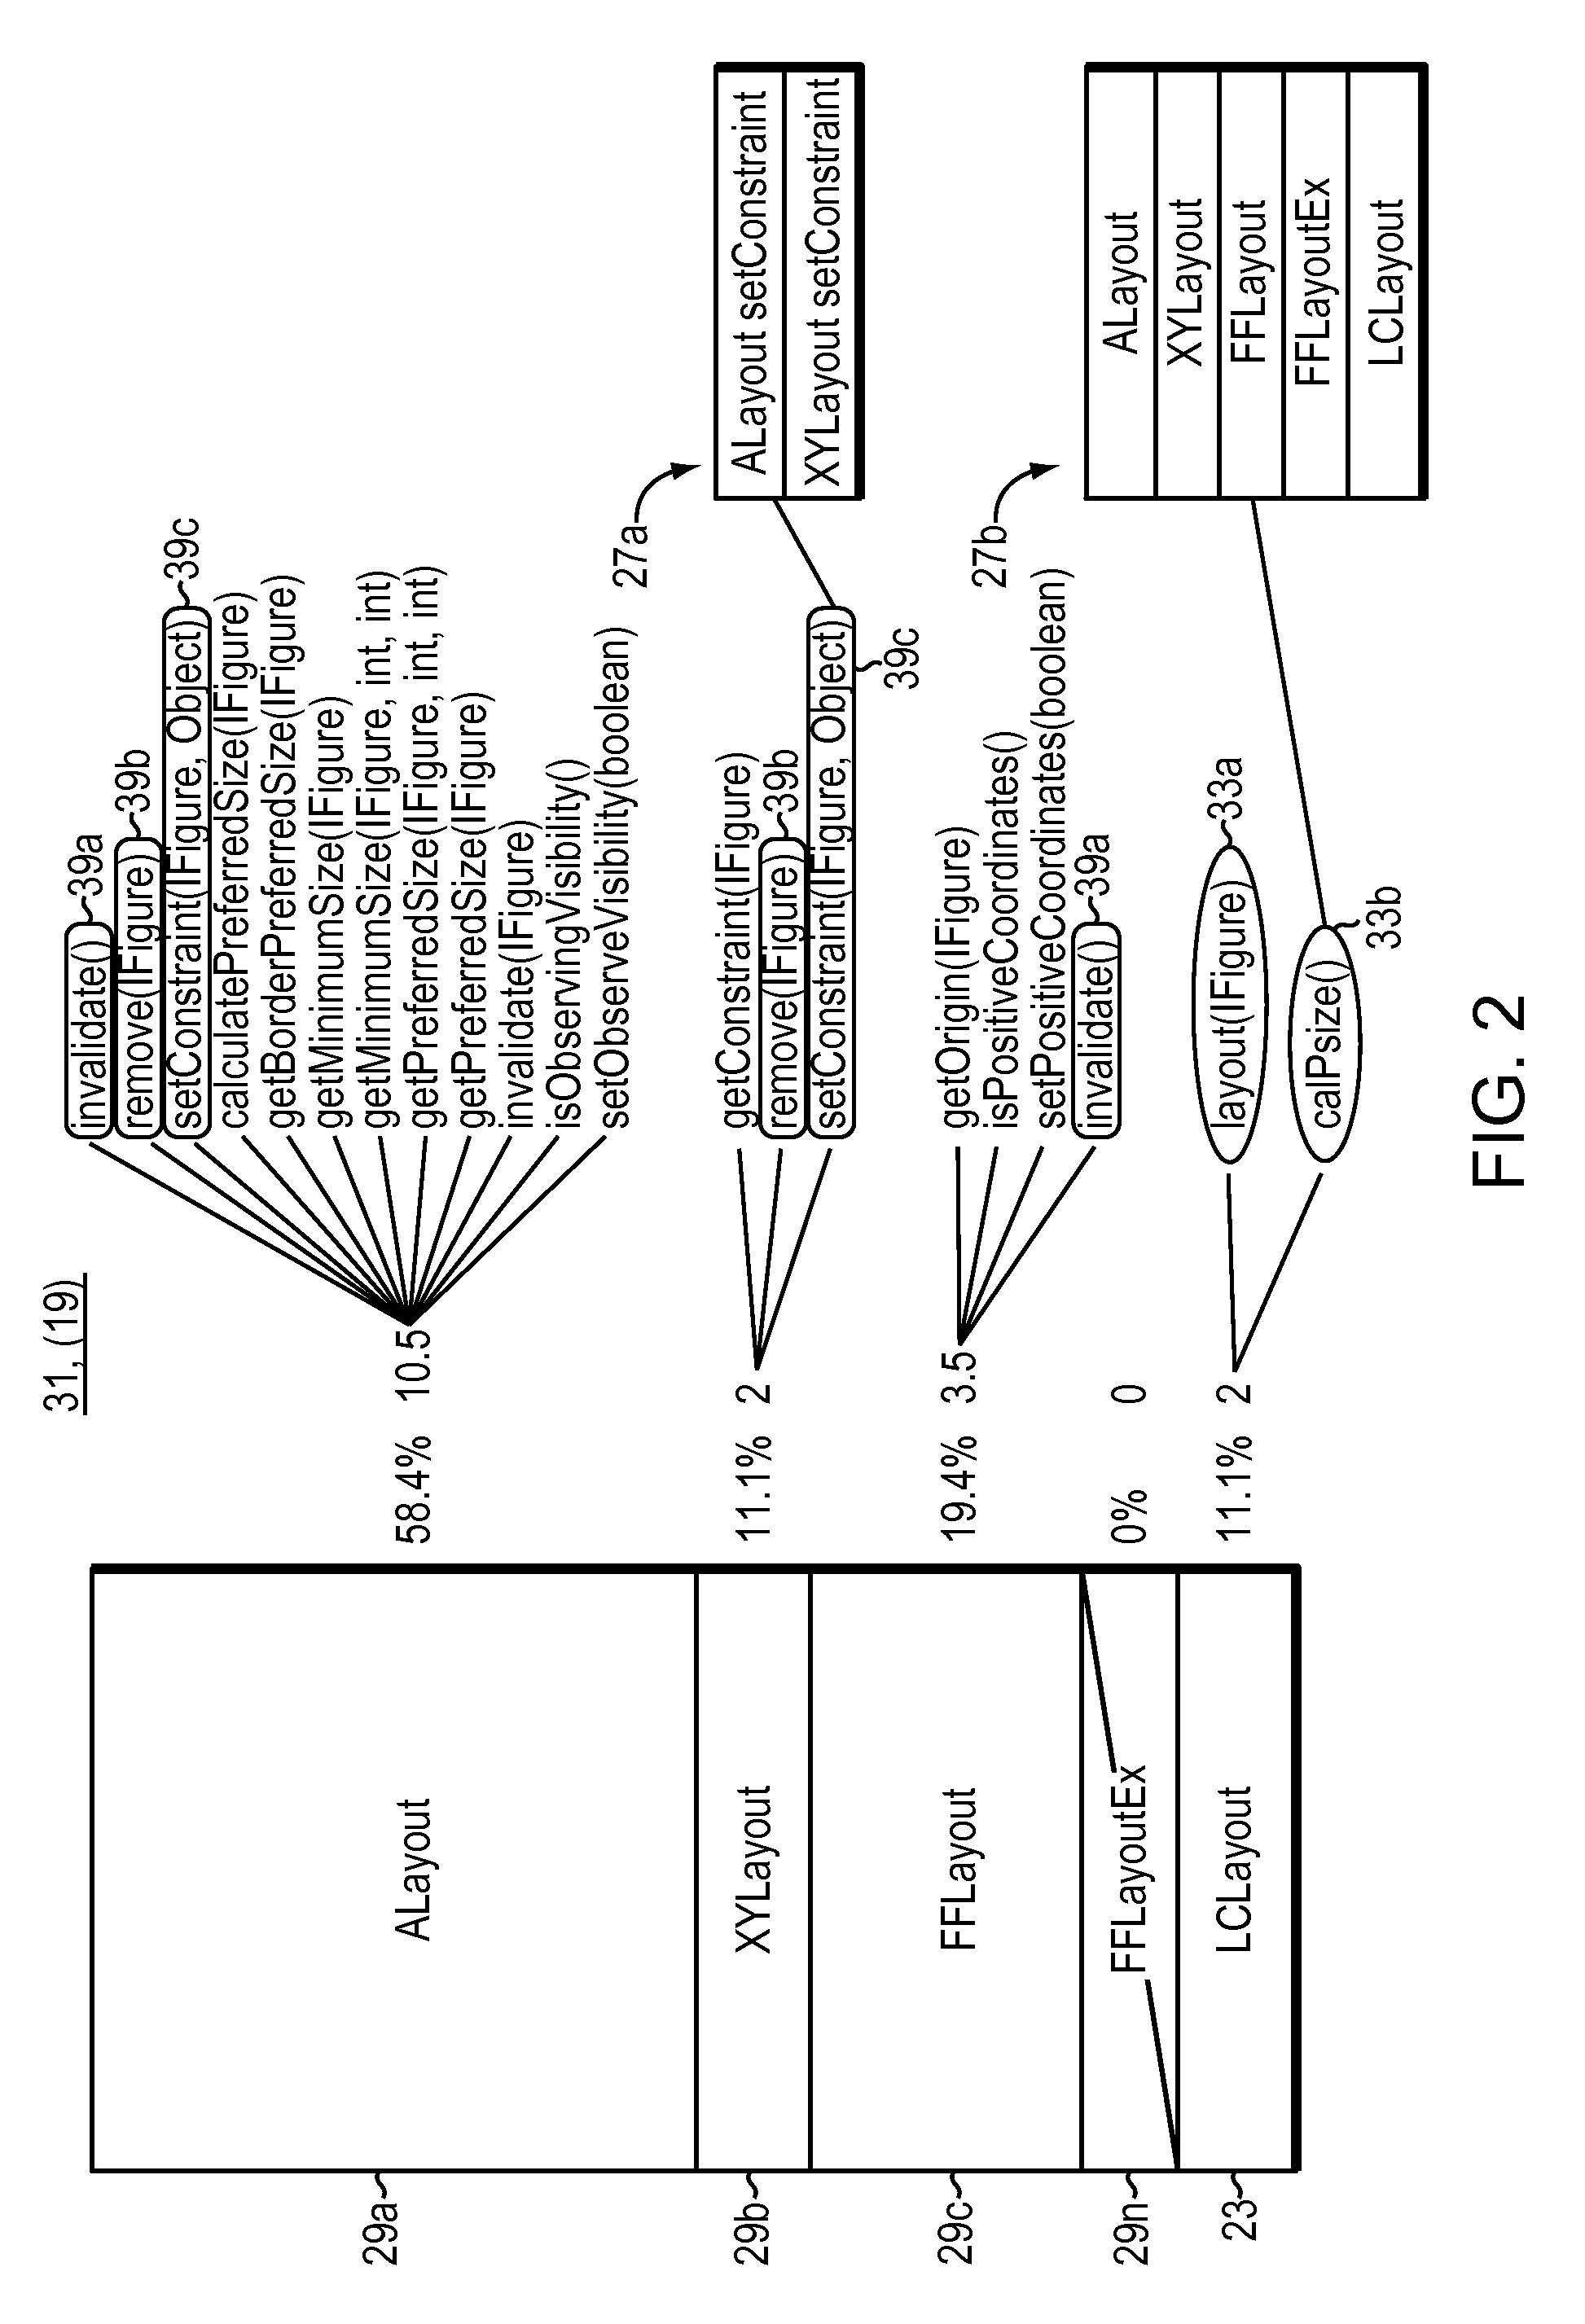 Hierarchical functional and variable composition diagramming of a programming class